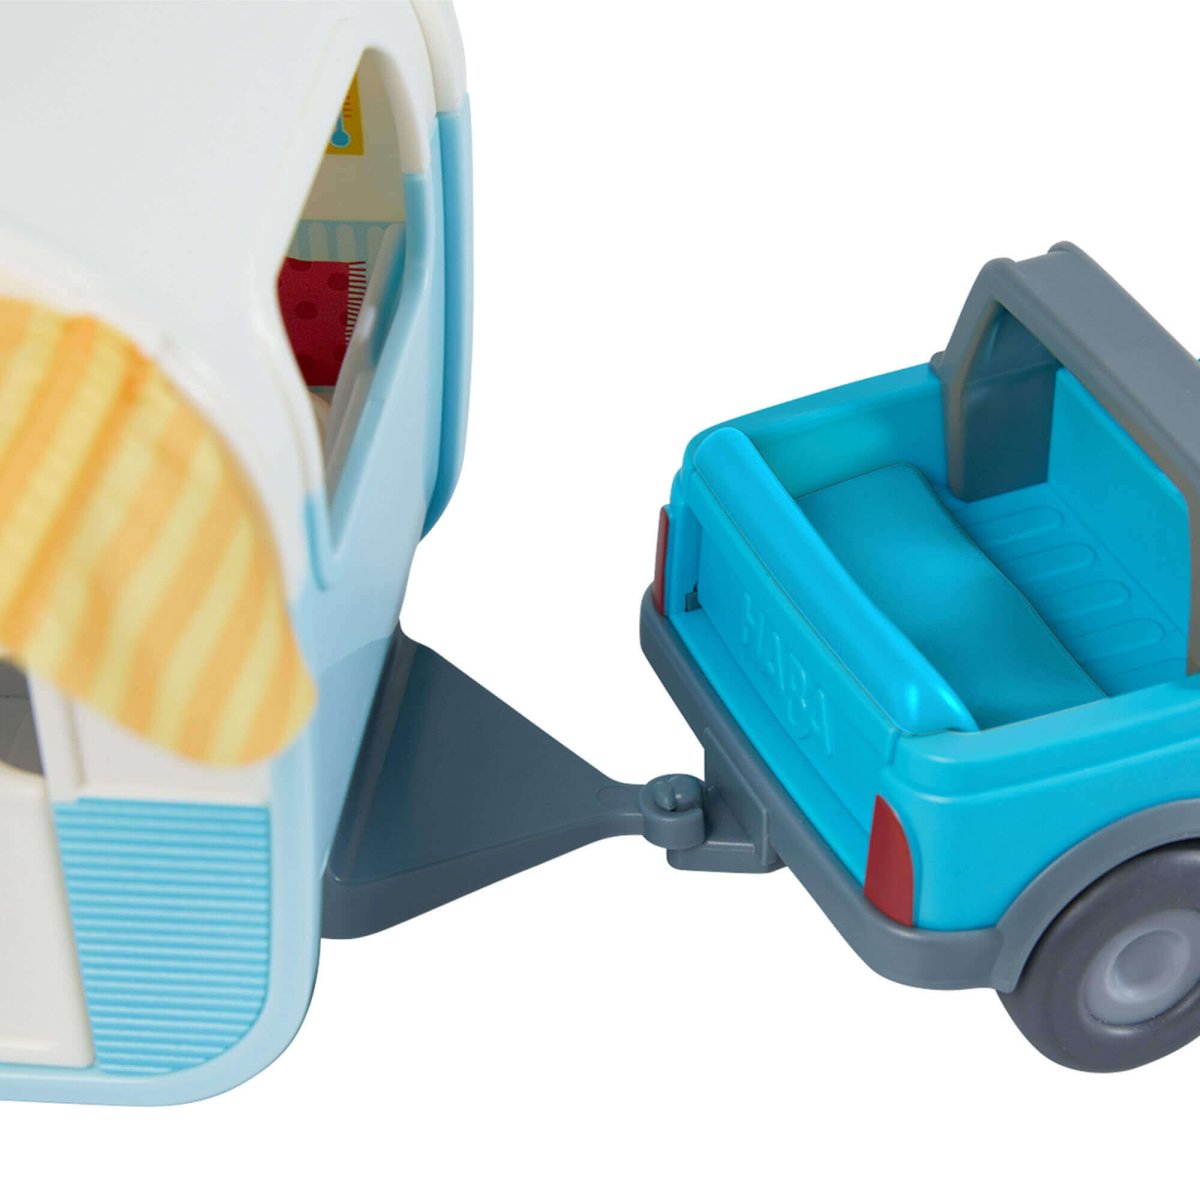 Little Friends Vacation Camper Play Set - The California Beach Co.